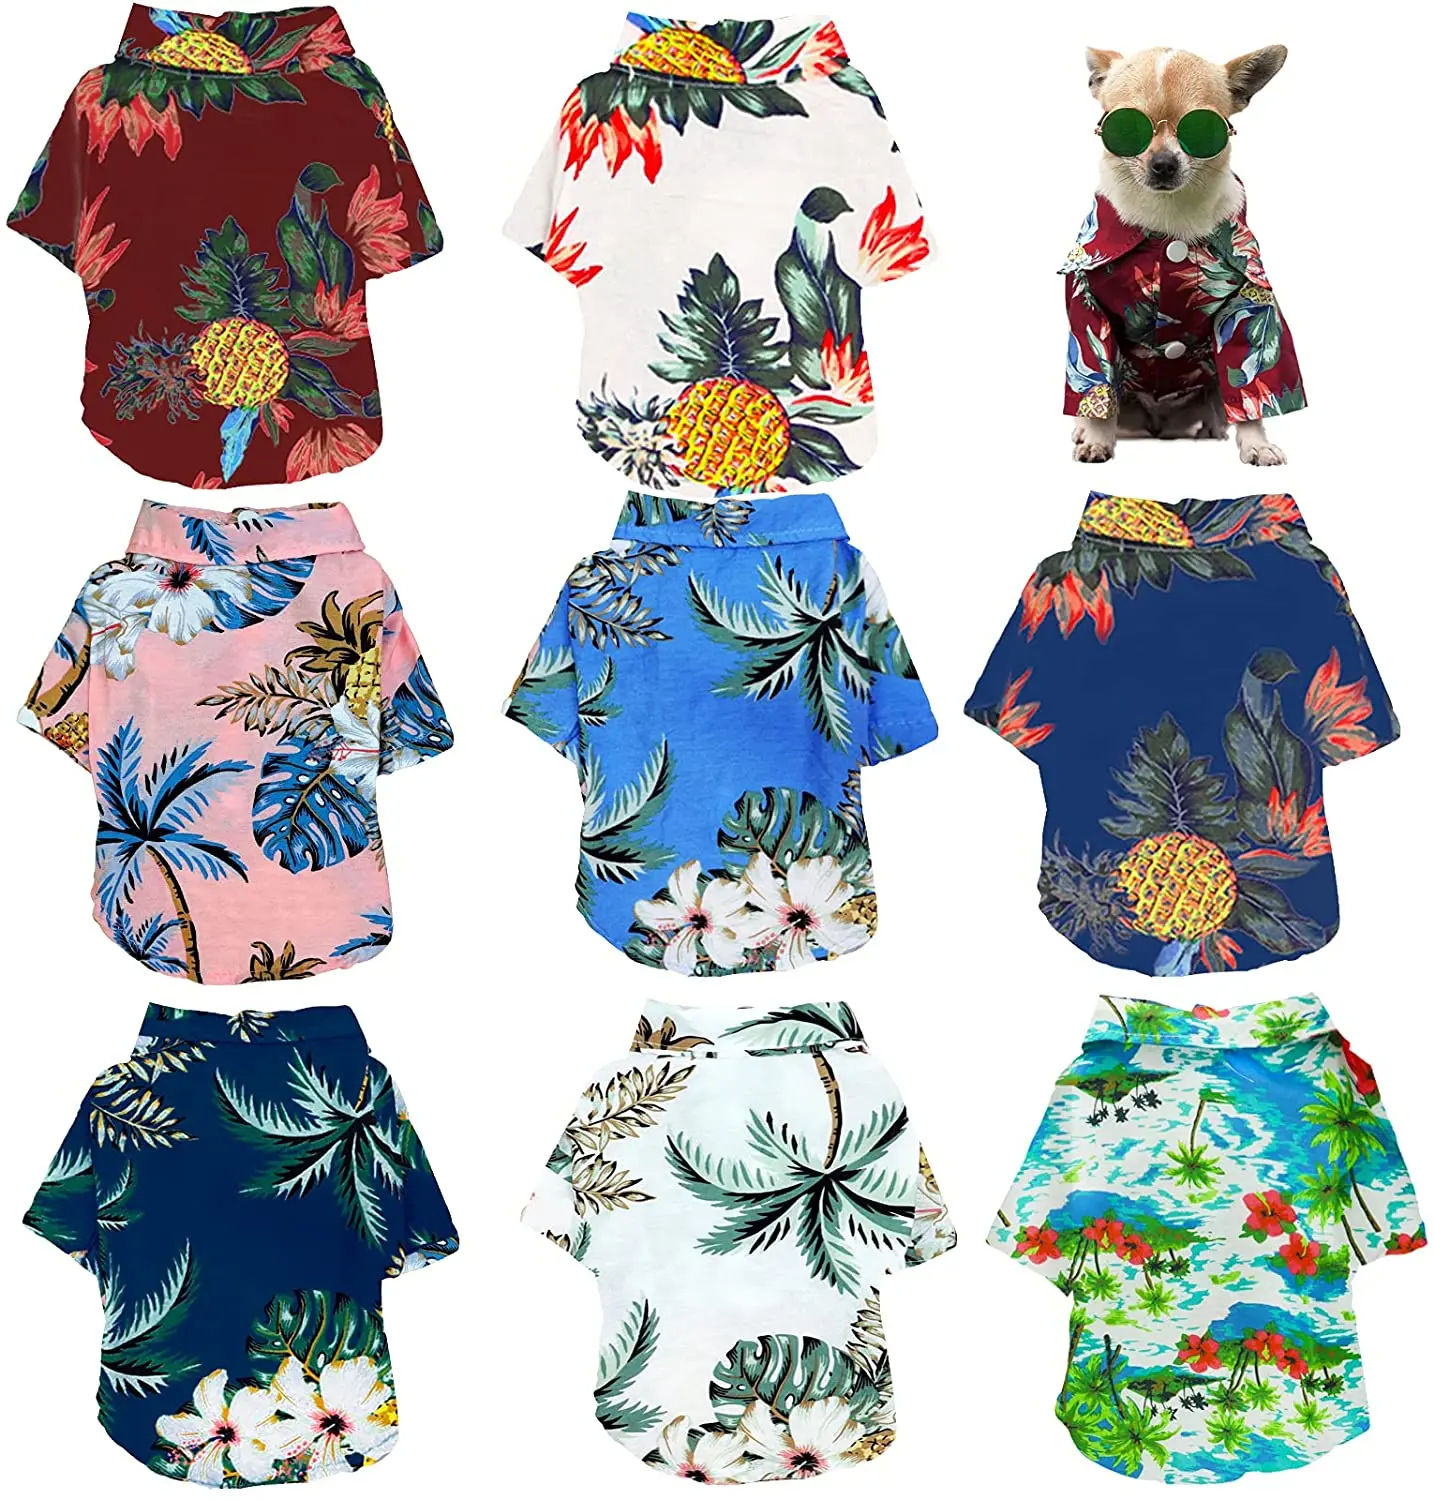 Summer Pet Printed Clothes For Dogs Floral Beach Shirt Jackets Dog Coat Puppy Costume Cat Spring.jpg